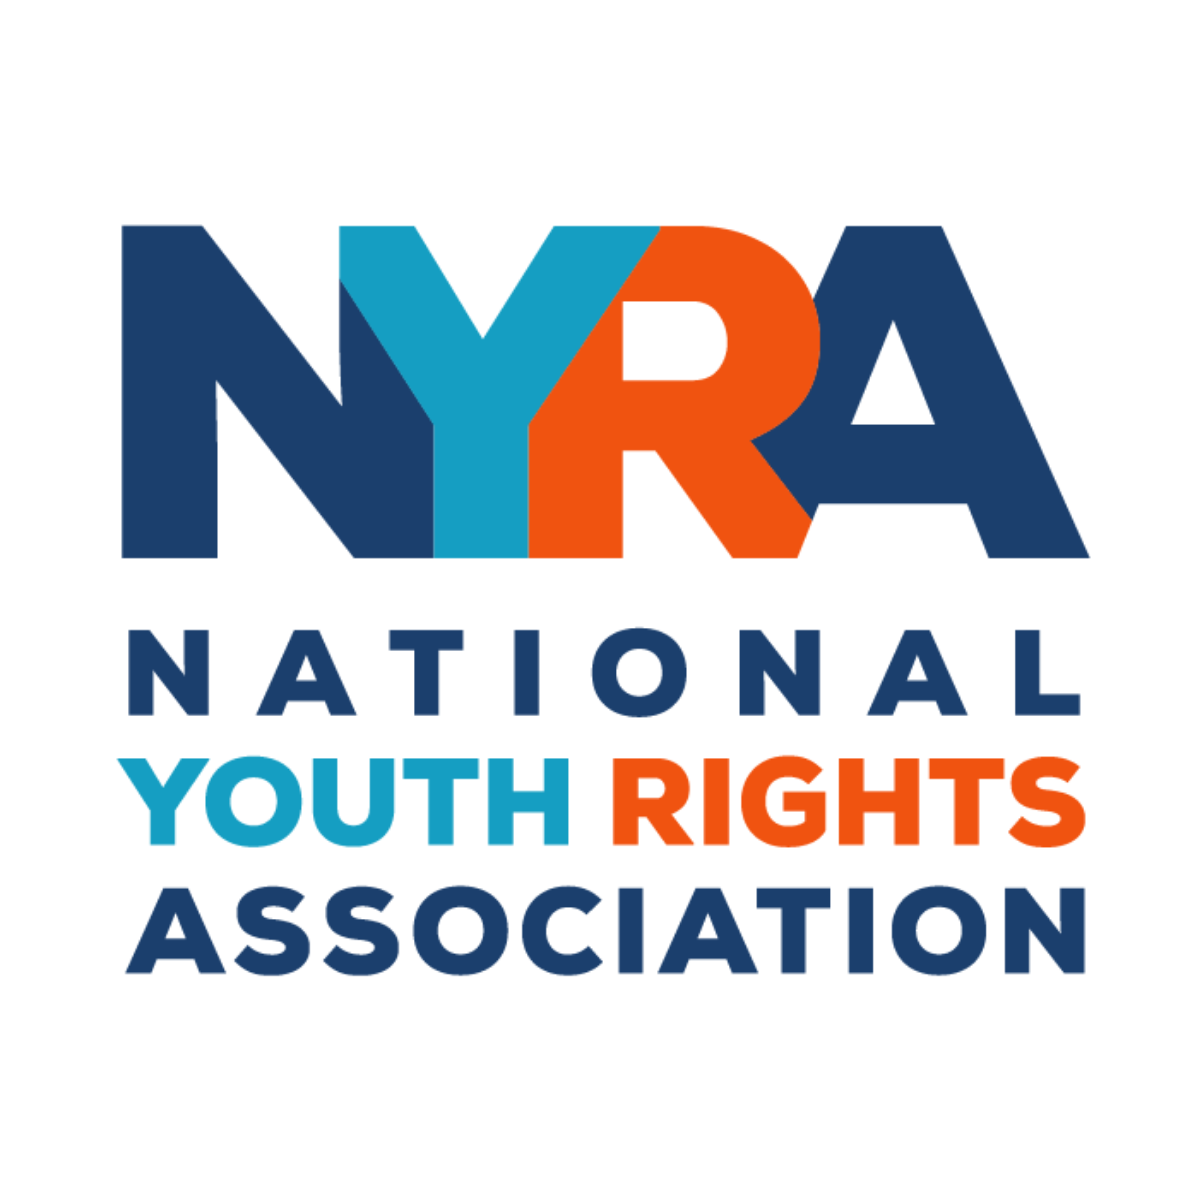 www.youthrights.org